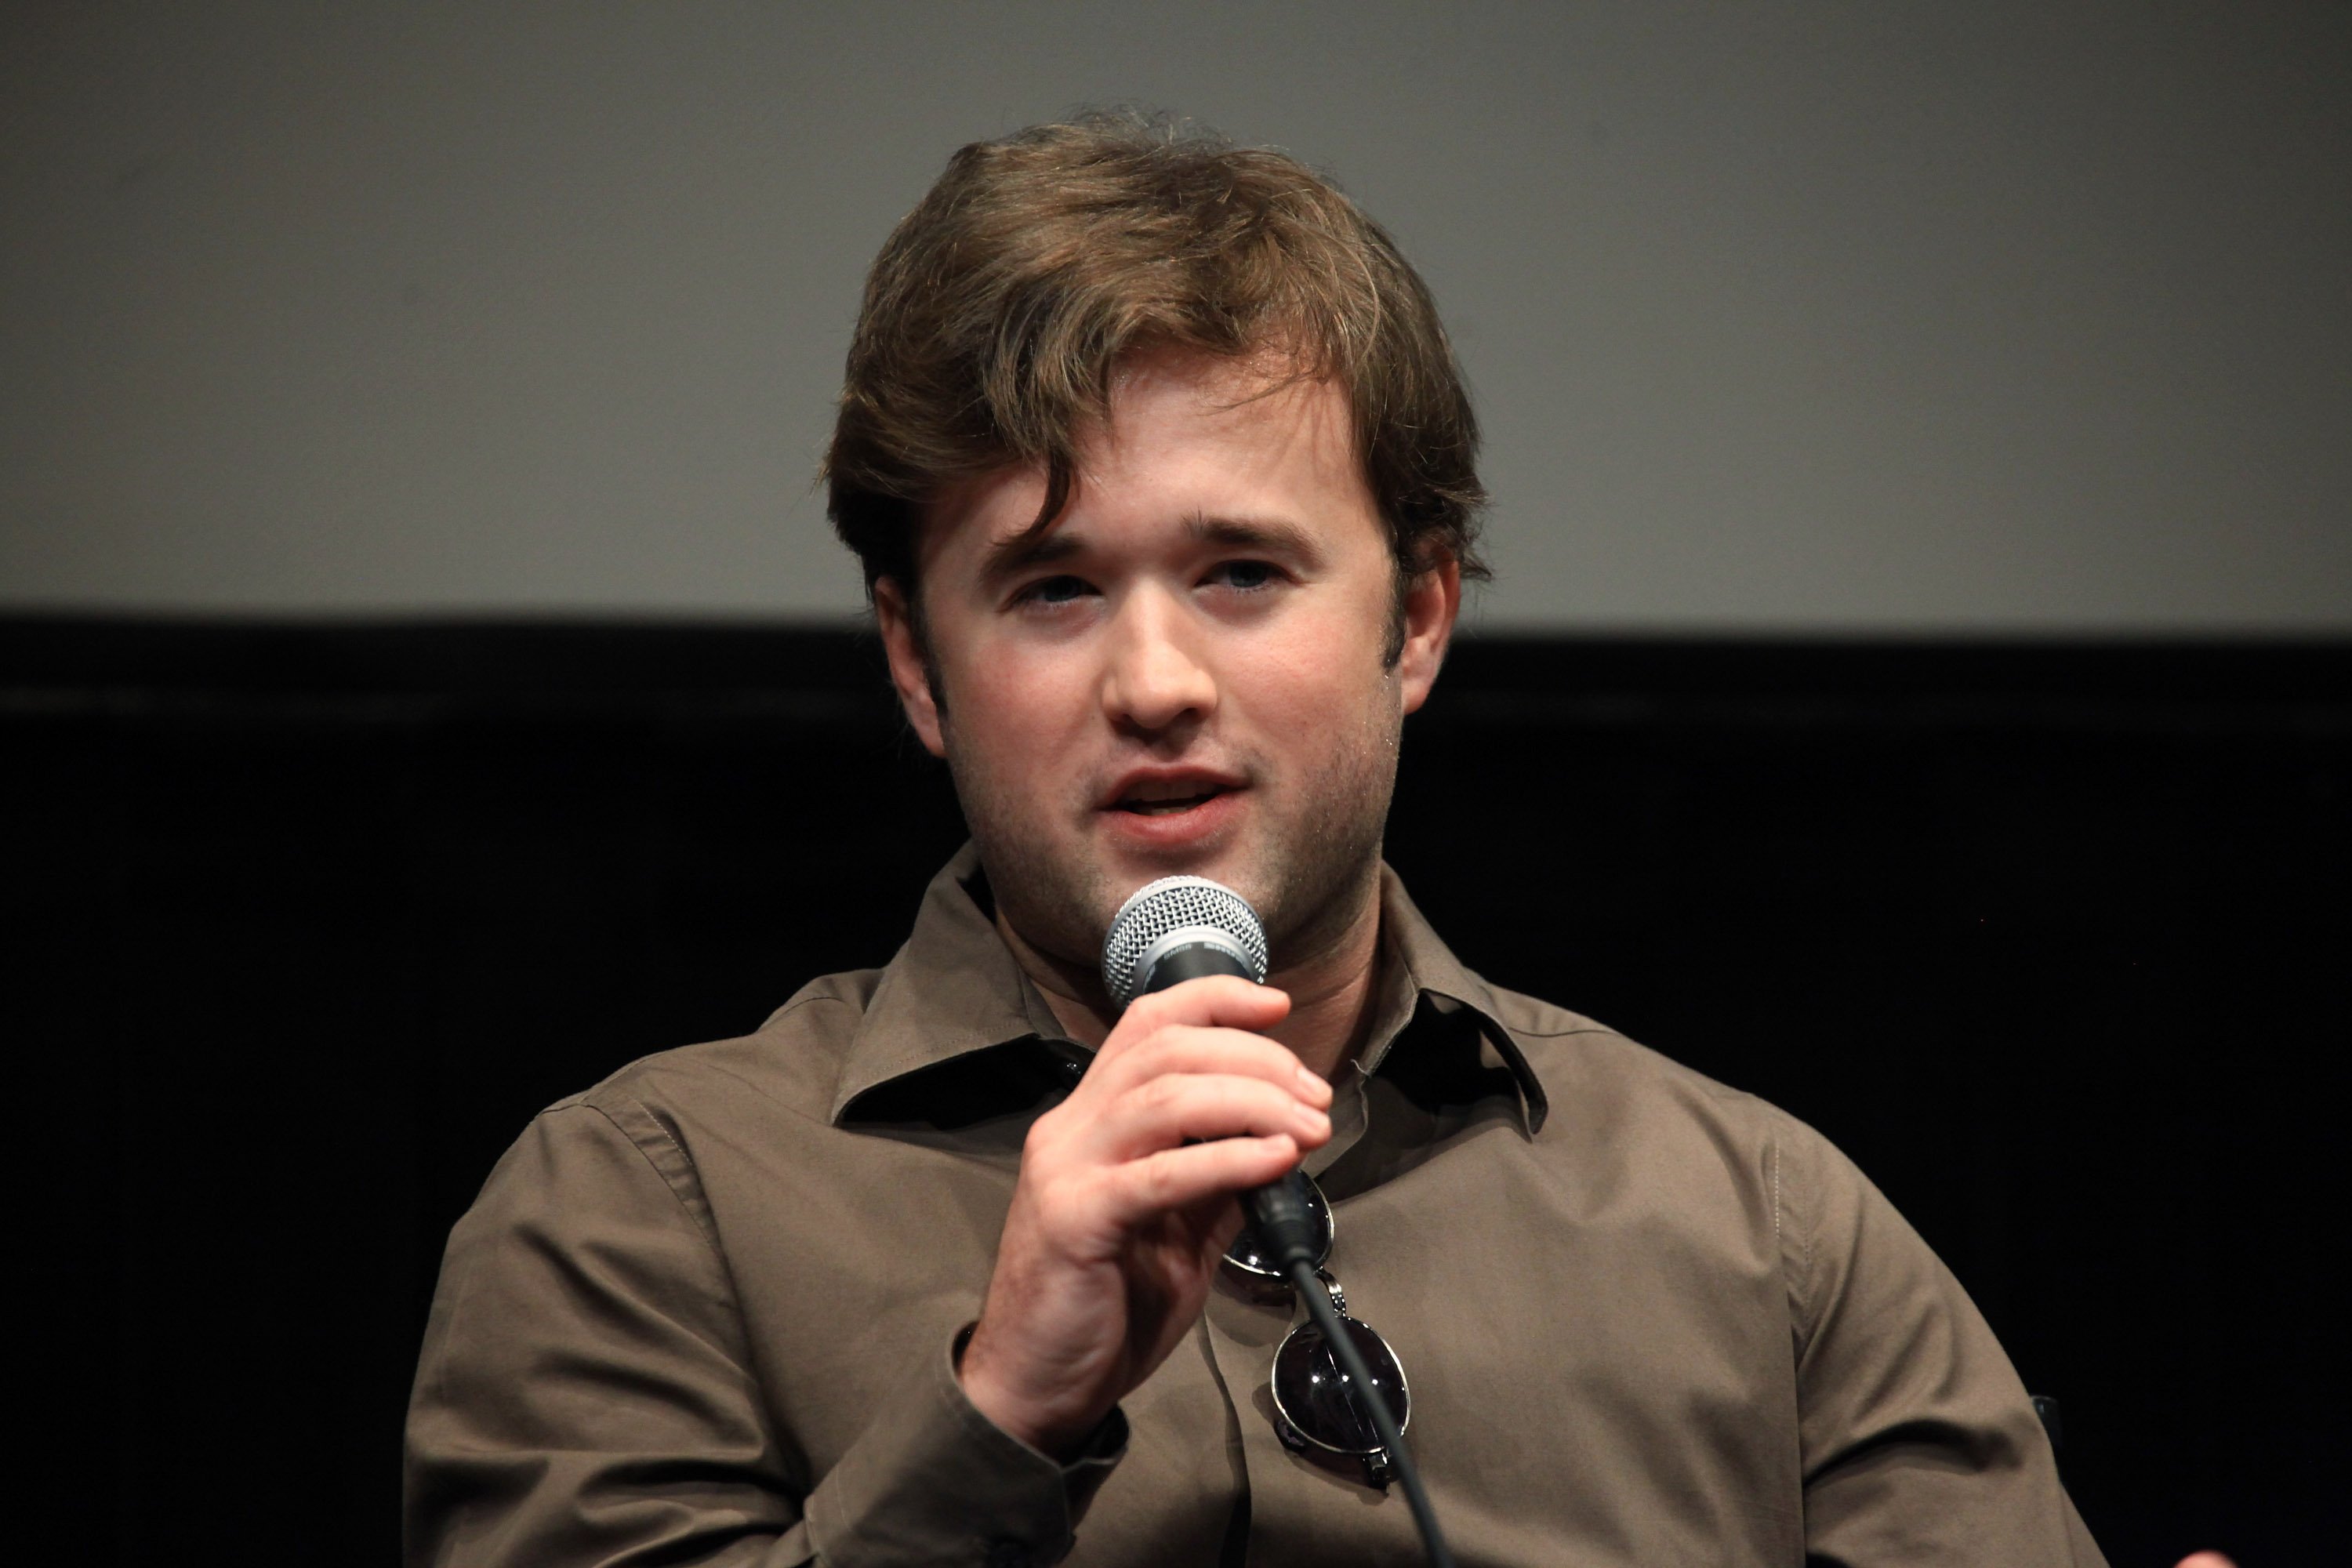 Haley Joel Osment in New York City after the 2012 "Sassy Pants" screening at Walter Reade Theater on July 31, 2012. | Source: Getty Images